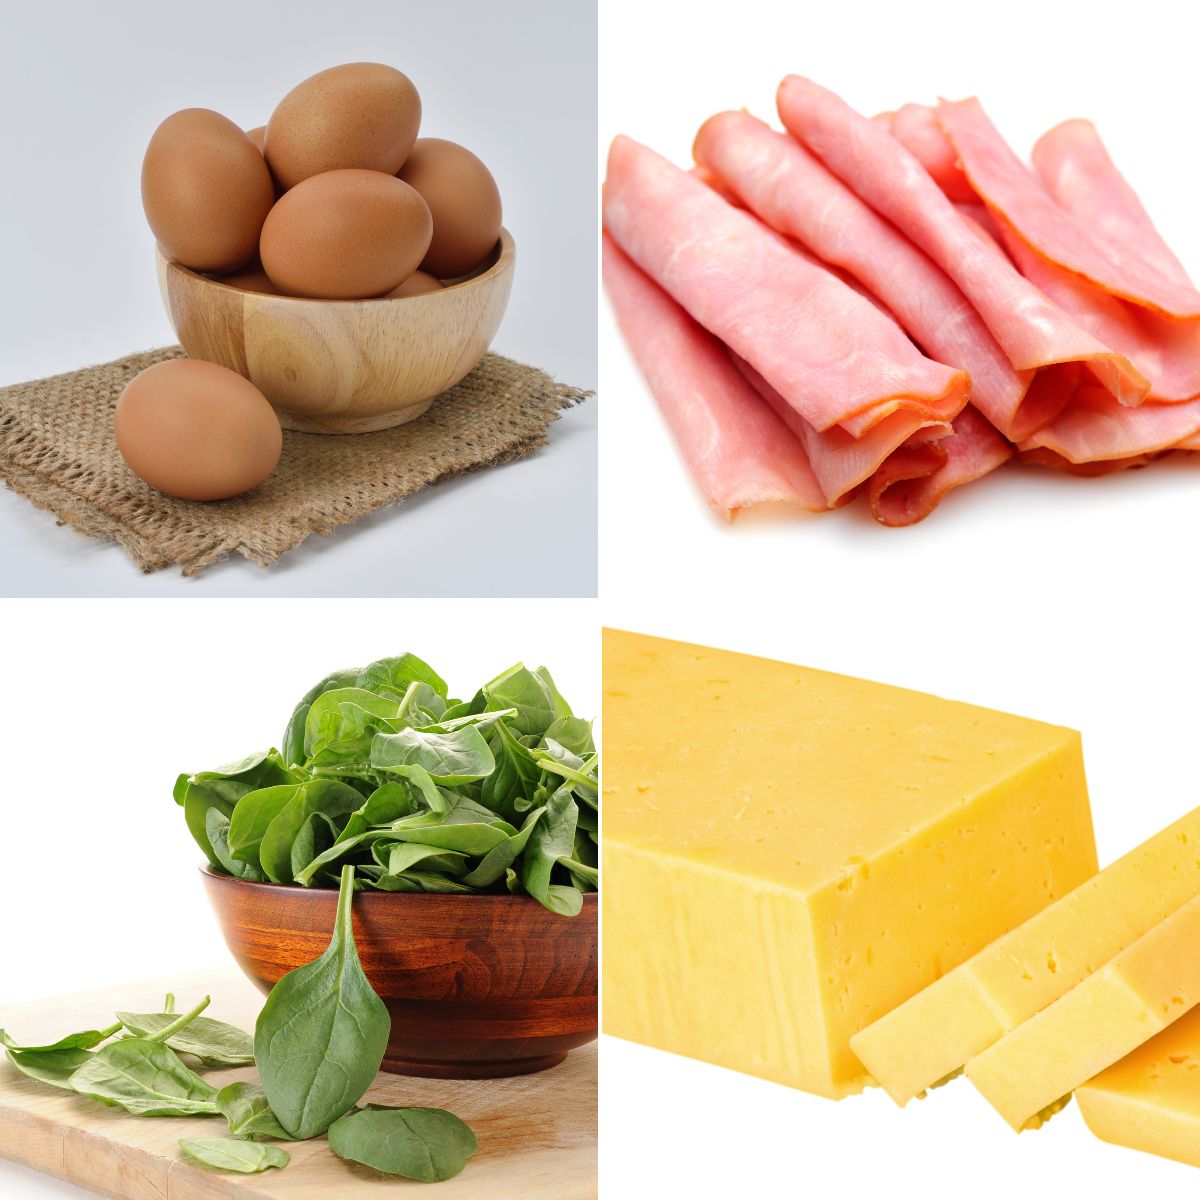 A collage of breakfast ingredients for a ham and cheese spinach quiche: eggs in a bowl, slices of ham, fresh spinach, and blocks of cheddar cheese.